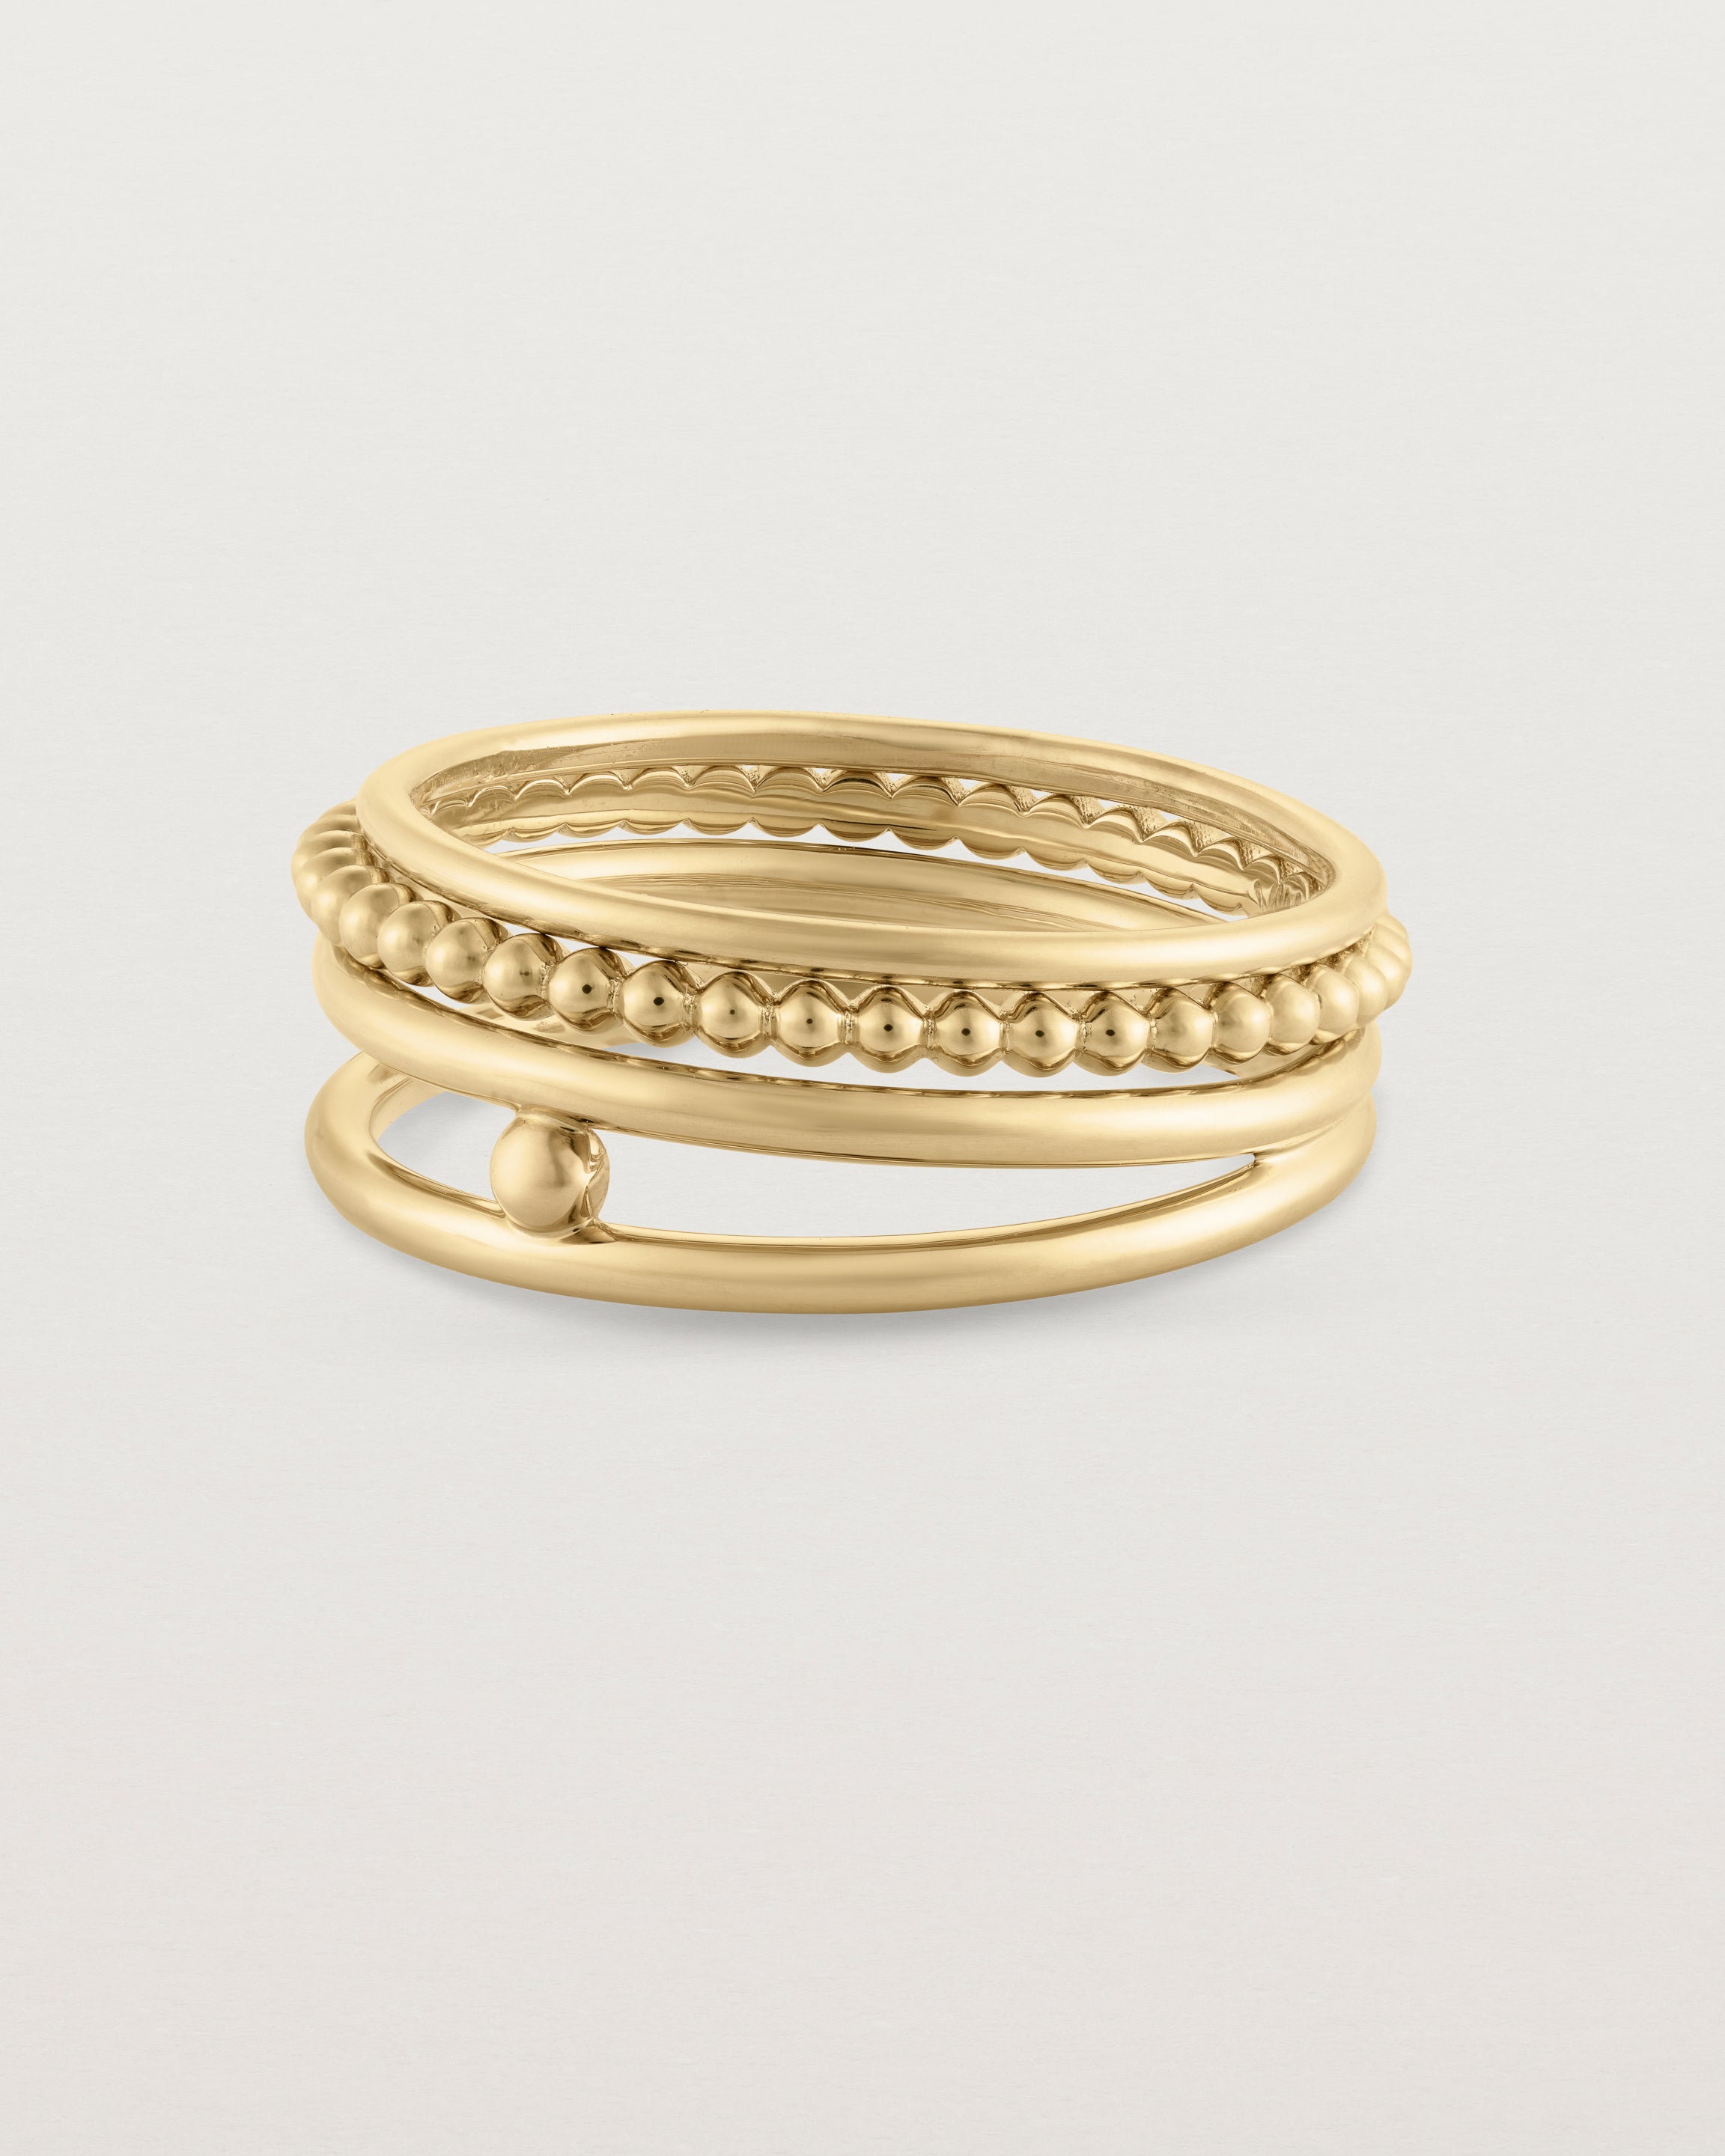 Angled view of the Textured Curated Ring Set in yellow gold.